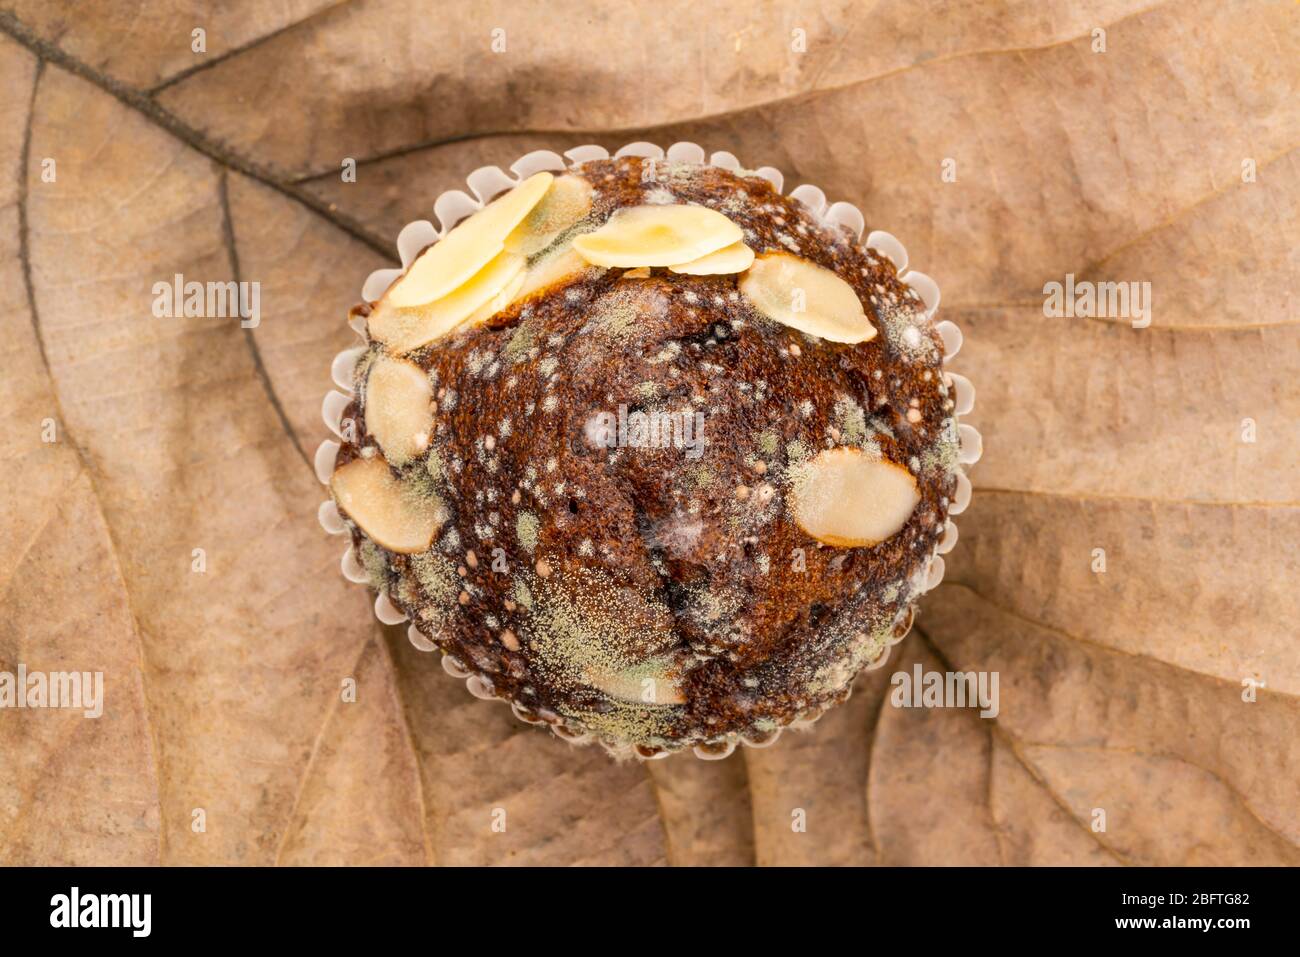 Top view of moldy chocolate muffin on dry leaf. Stock Photo